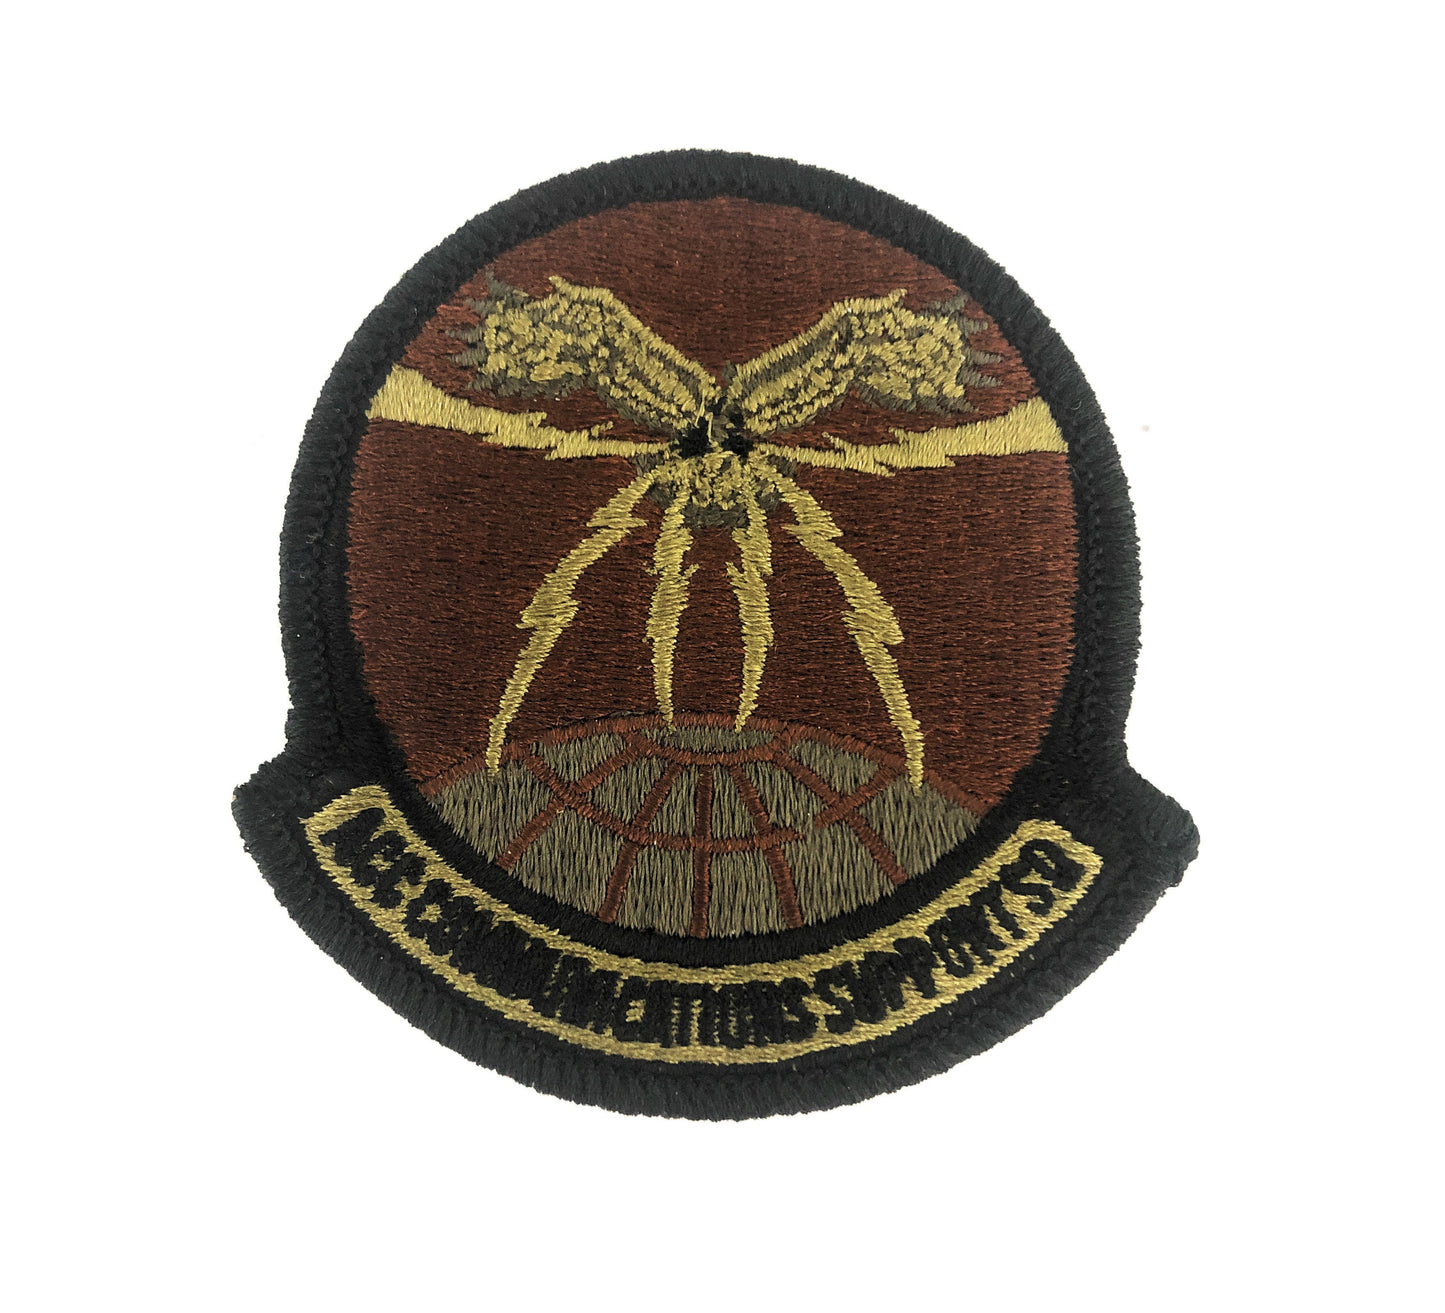 U.S. Air Force ACC Communications Support Squadron OCP Scorpion Spice Brown Patch with Hook Fastener